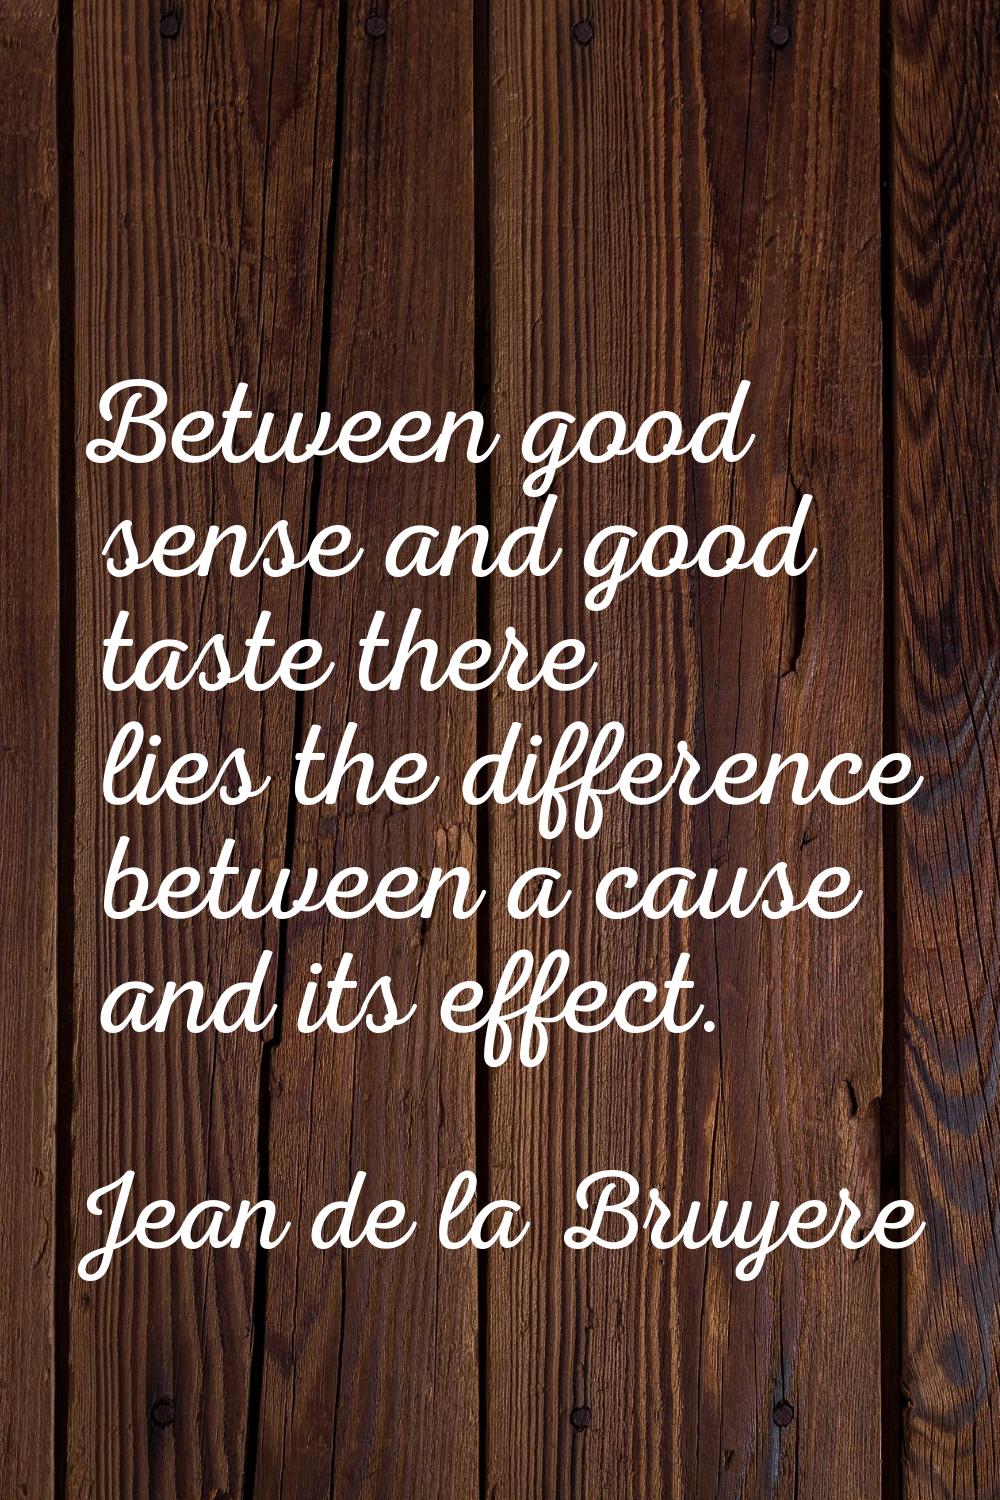 Between good sense and good taste there lies the difference between a cause and its effect.